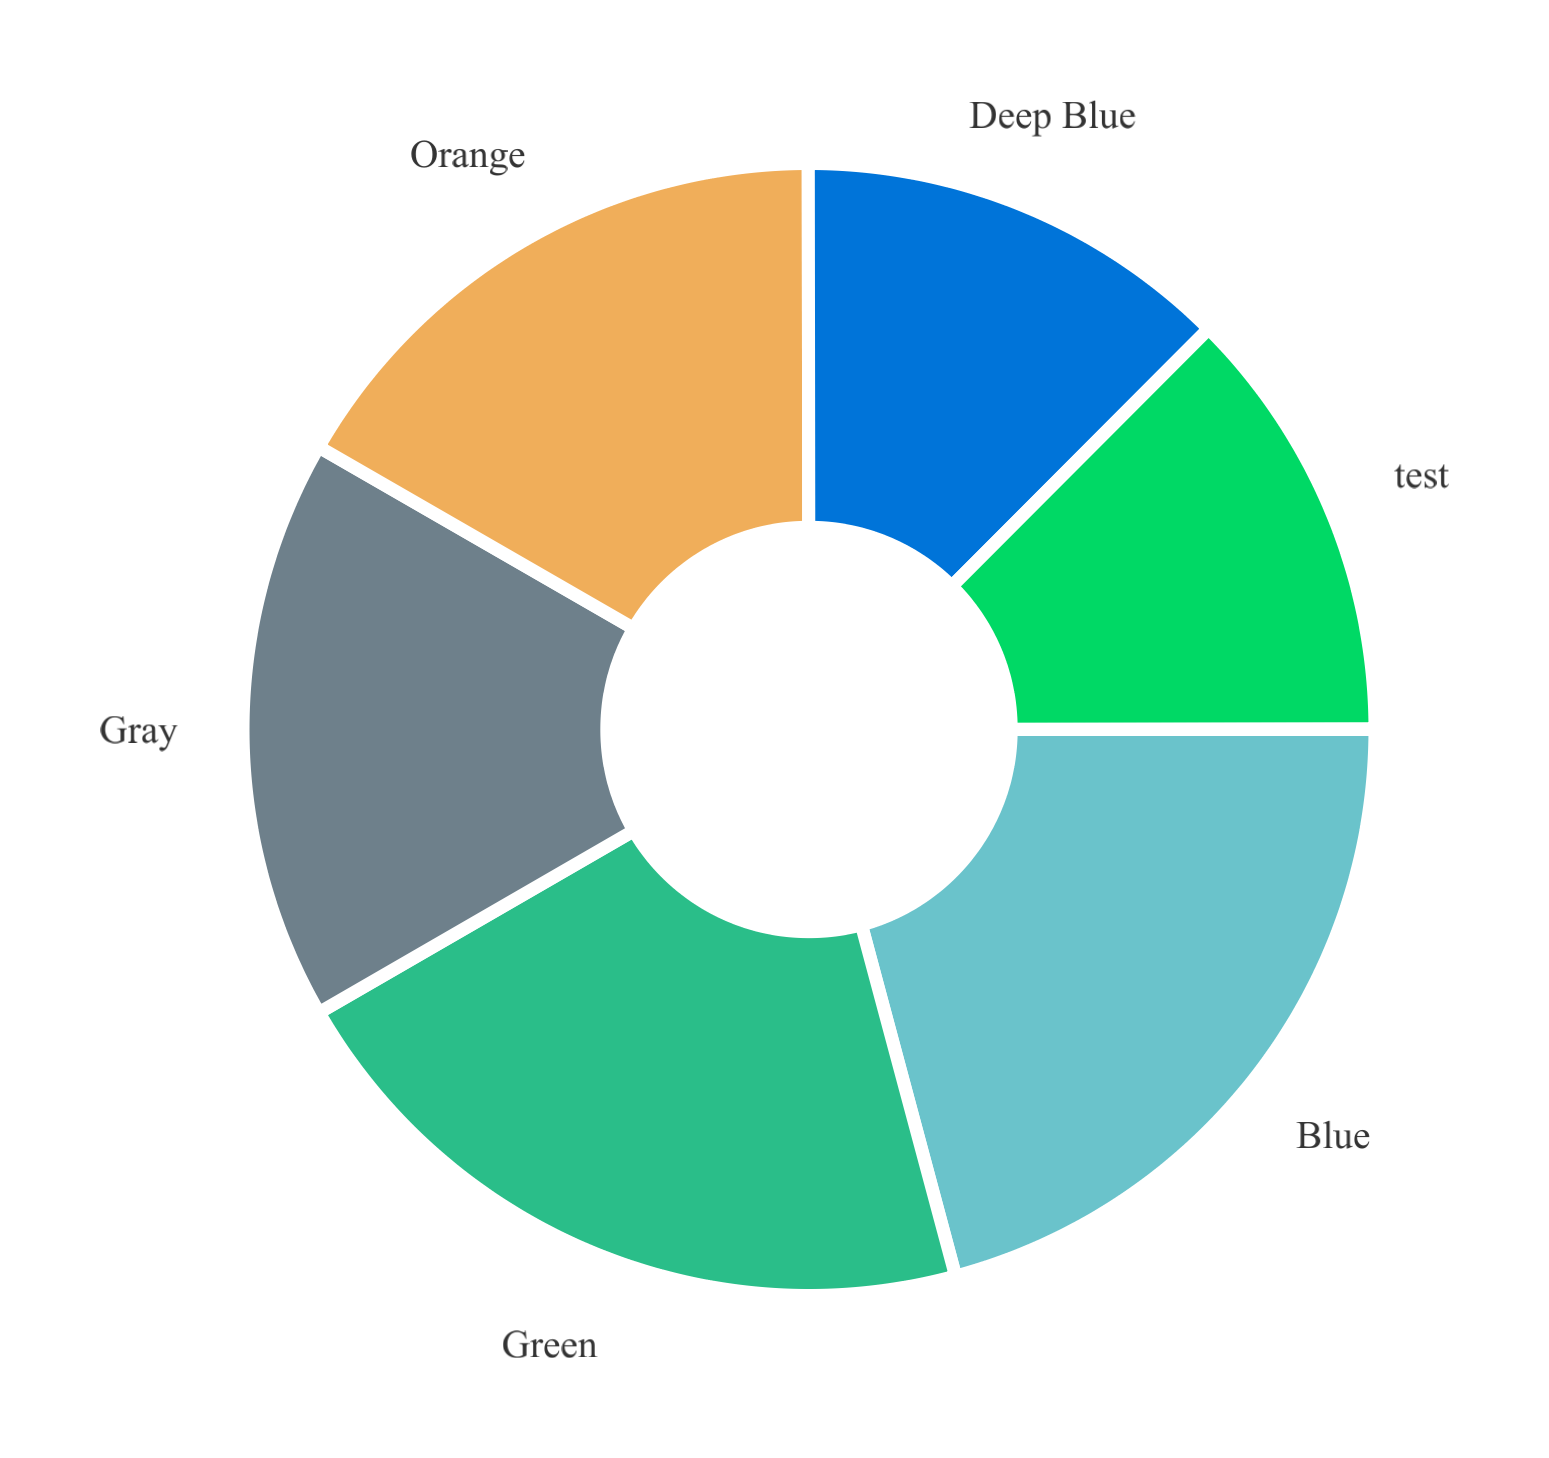 Sample donut chart output